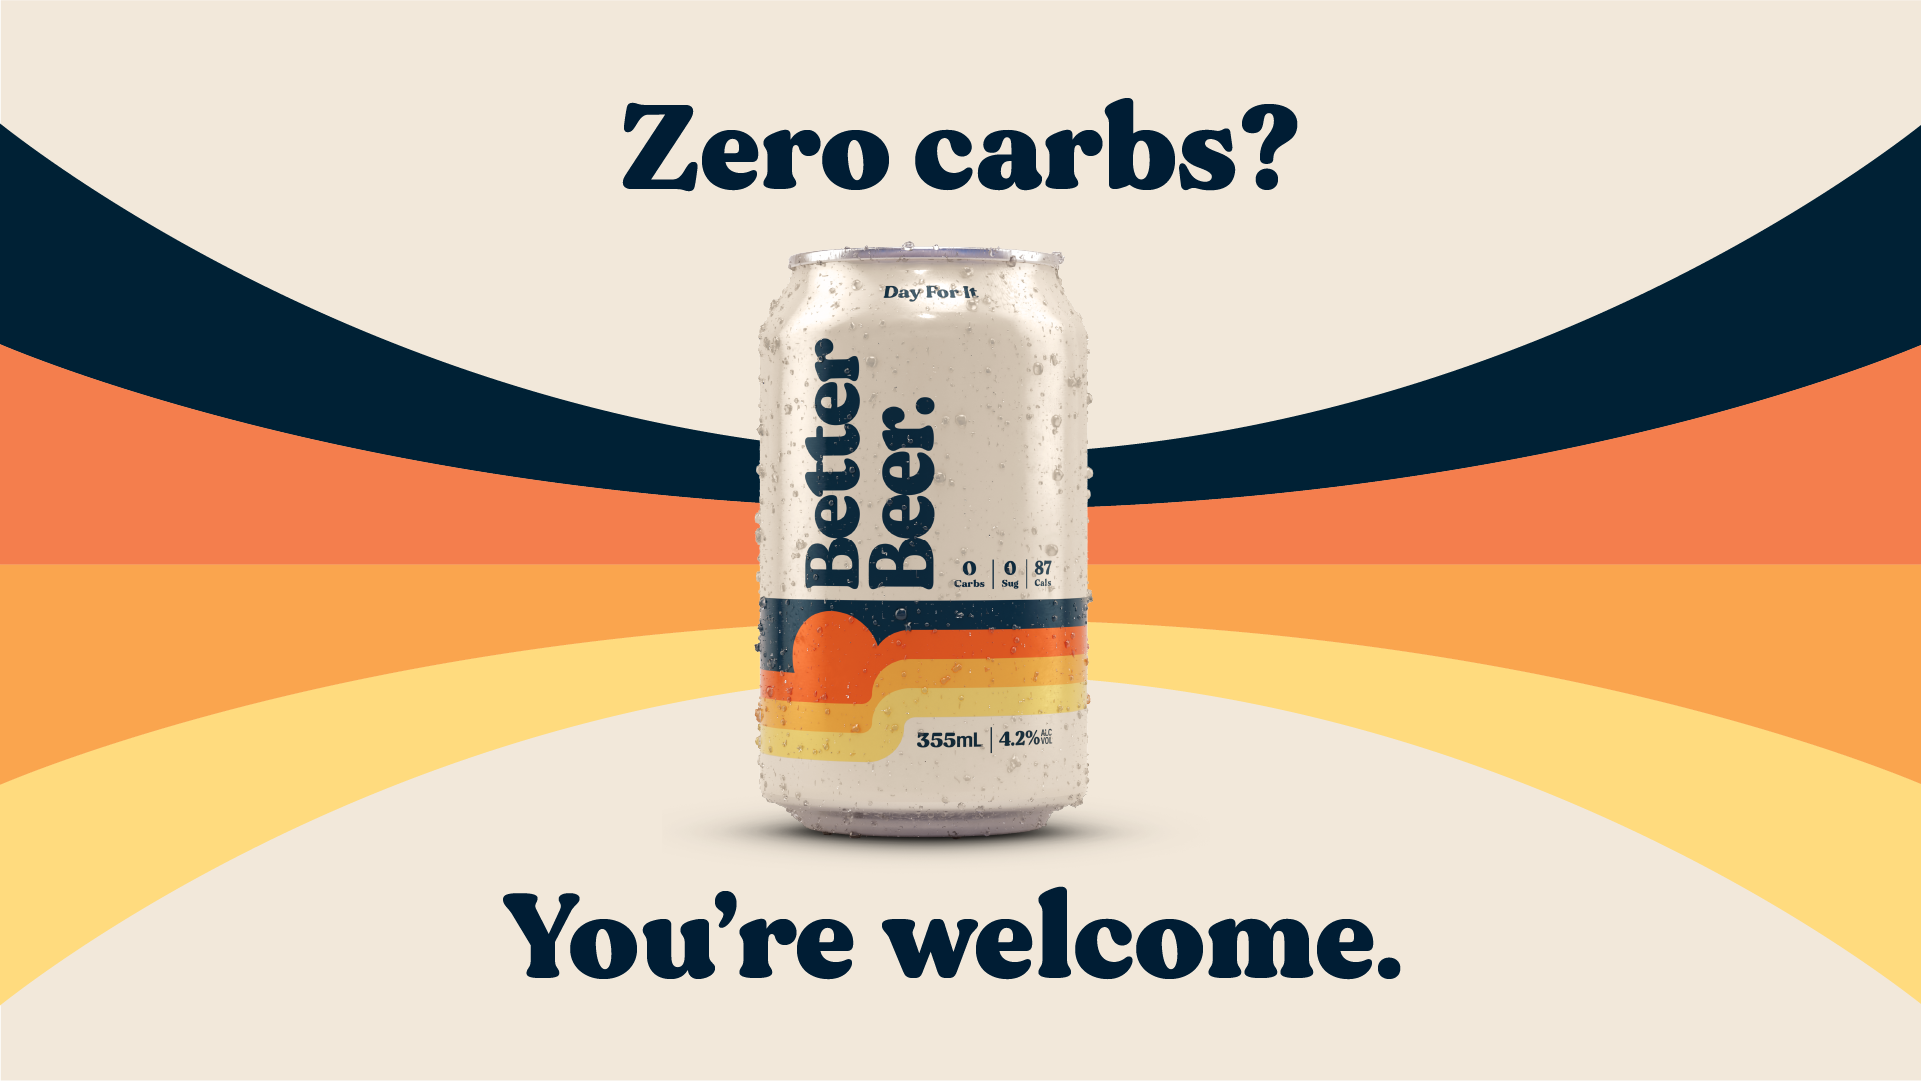 Better Beer can shown within advert with text saying 'Zero carbs? You're welcome.'